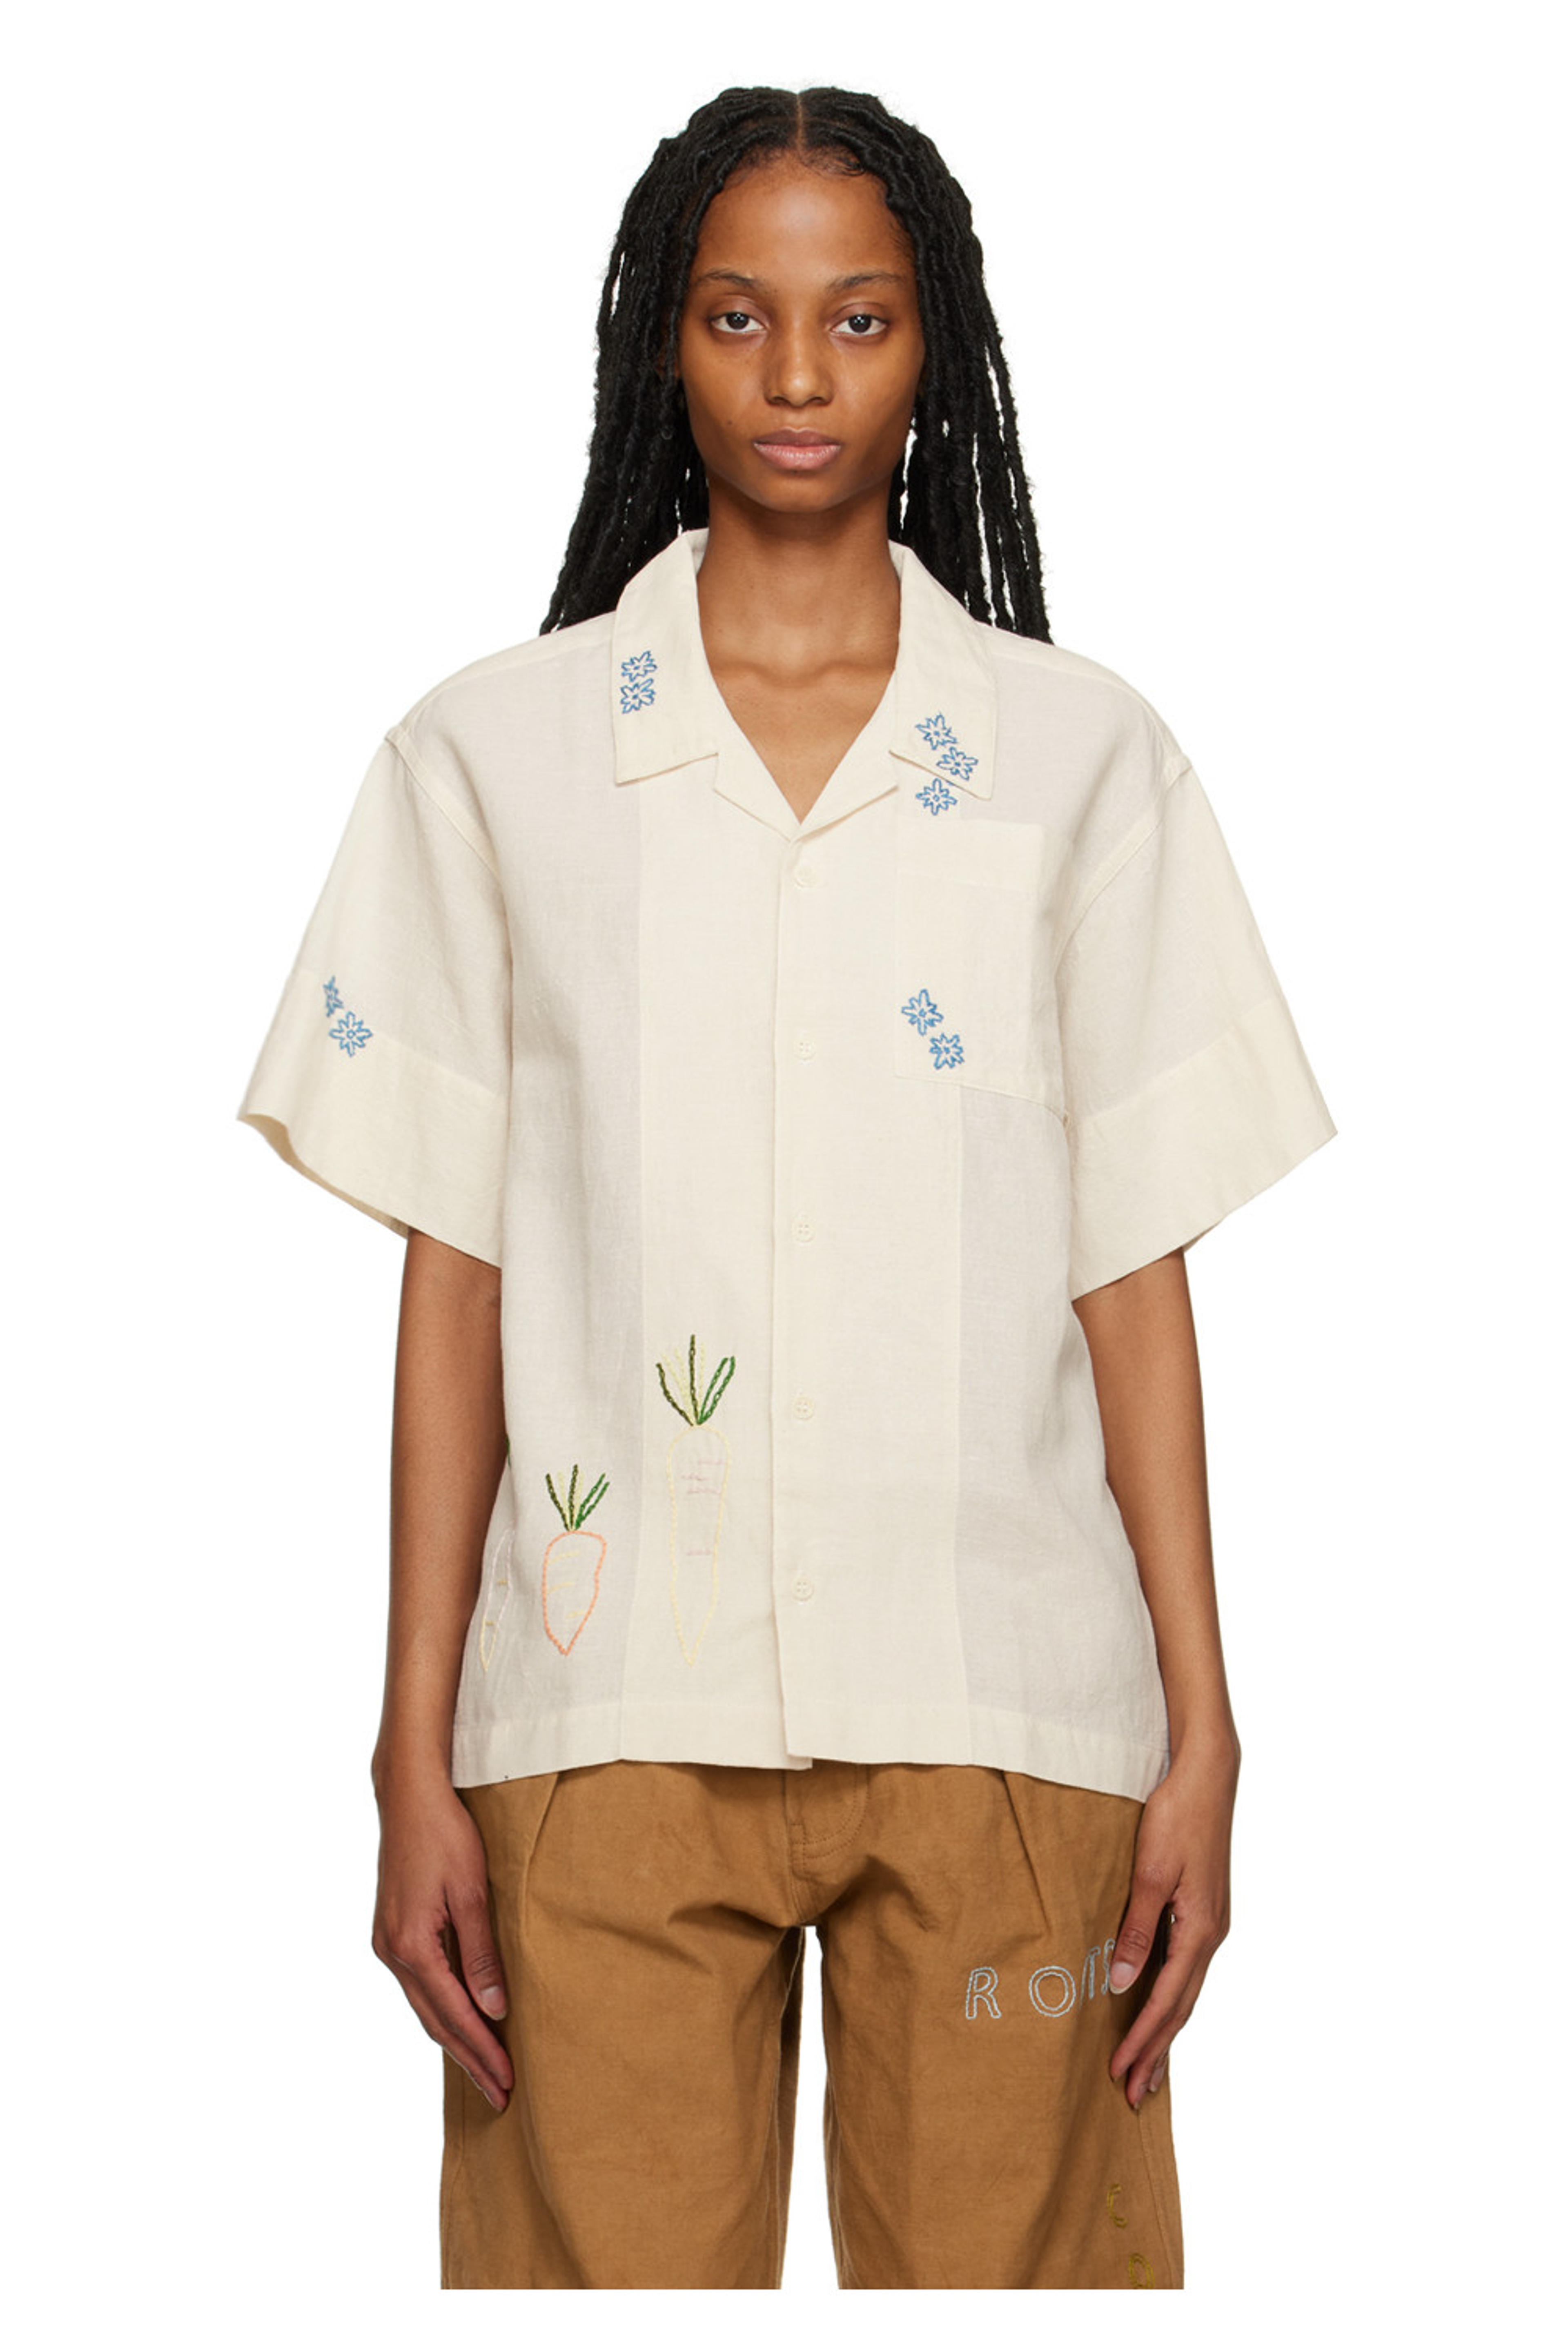 Off-White Greetings Shirt by Story mfg. on Sale